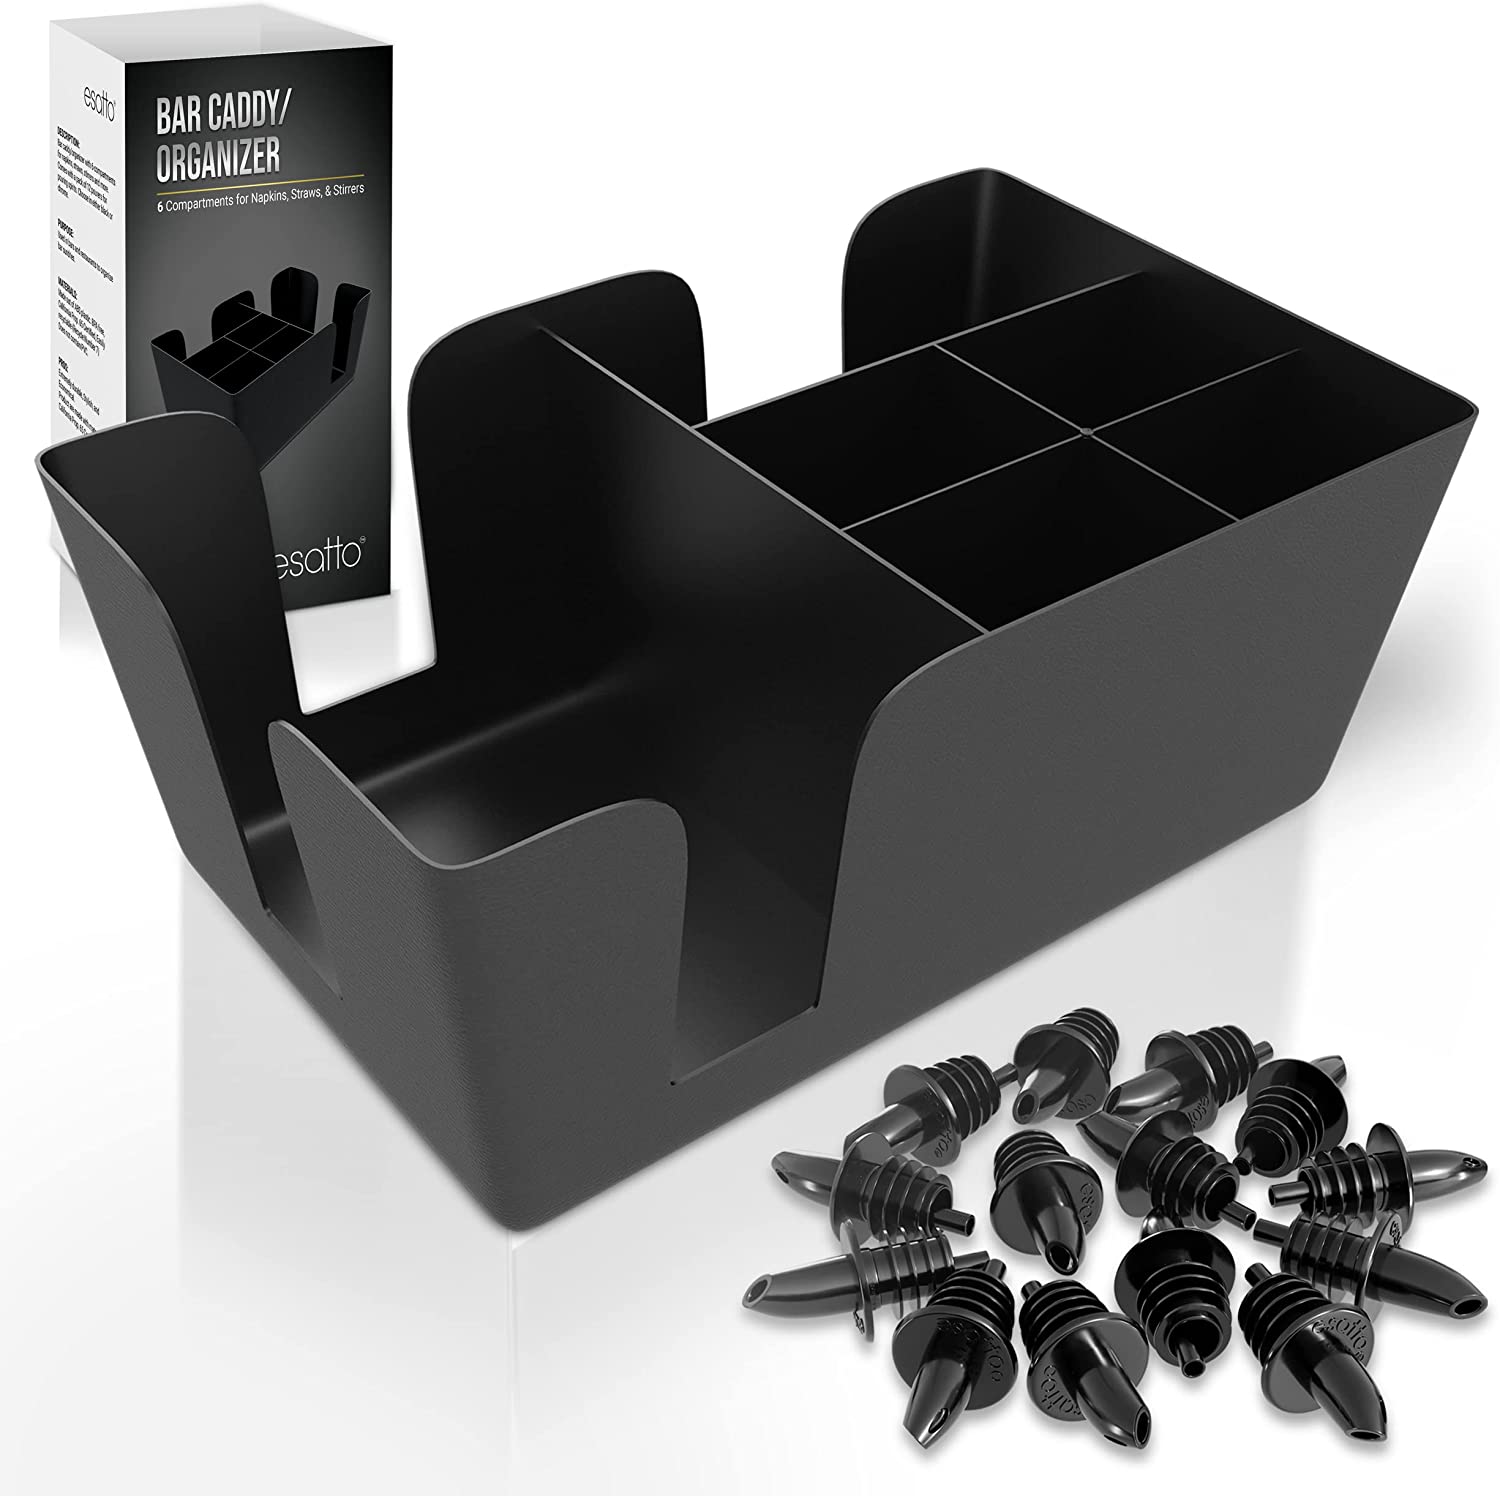 Esatto Bar Products Premium Rectangular Bar Caddy (Black), Organize Bar Items, With 12 Black Plastic Pourers Included